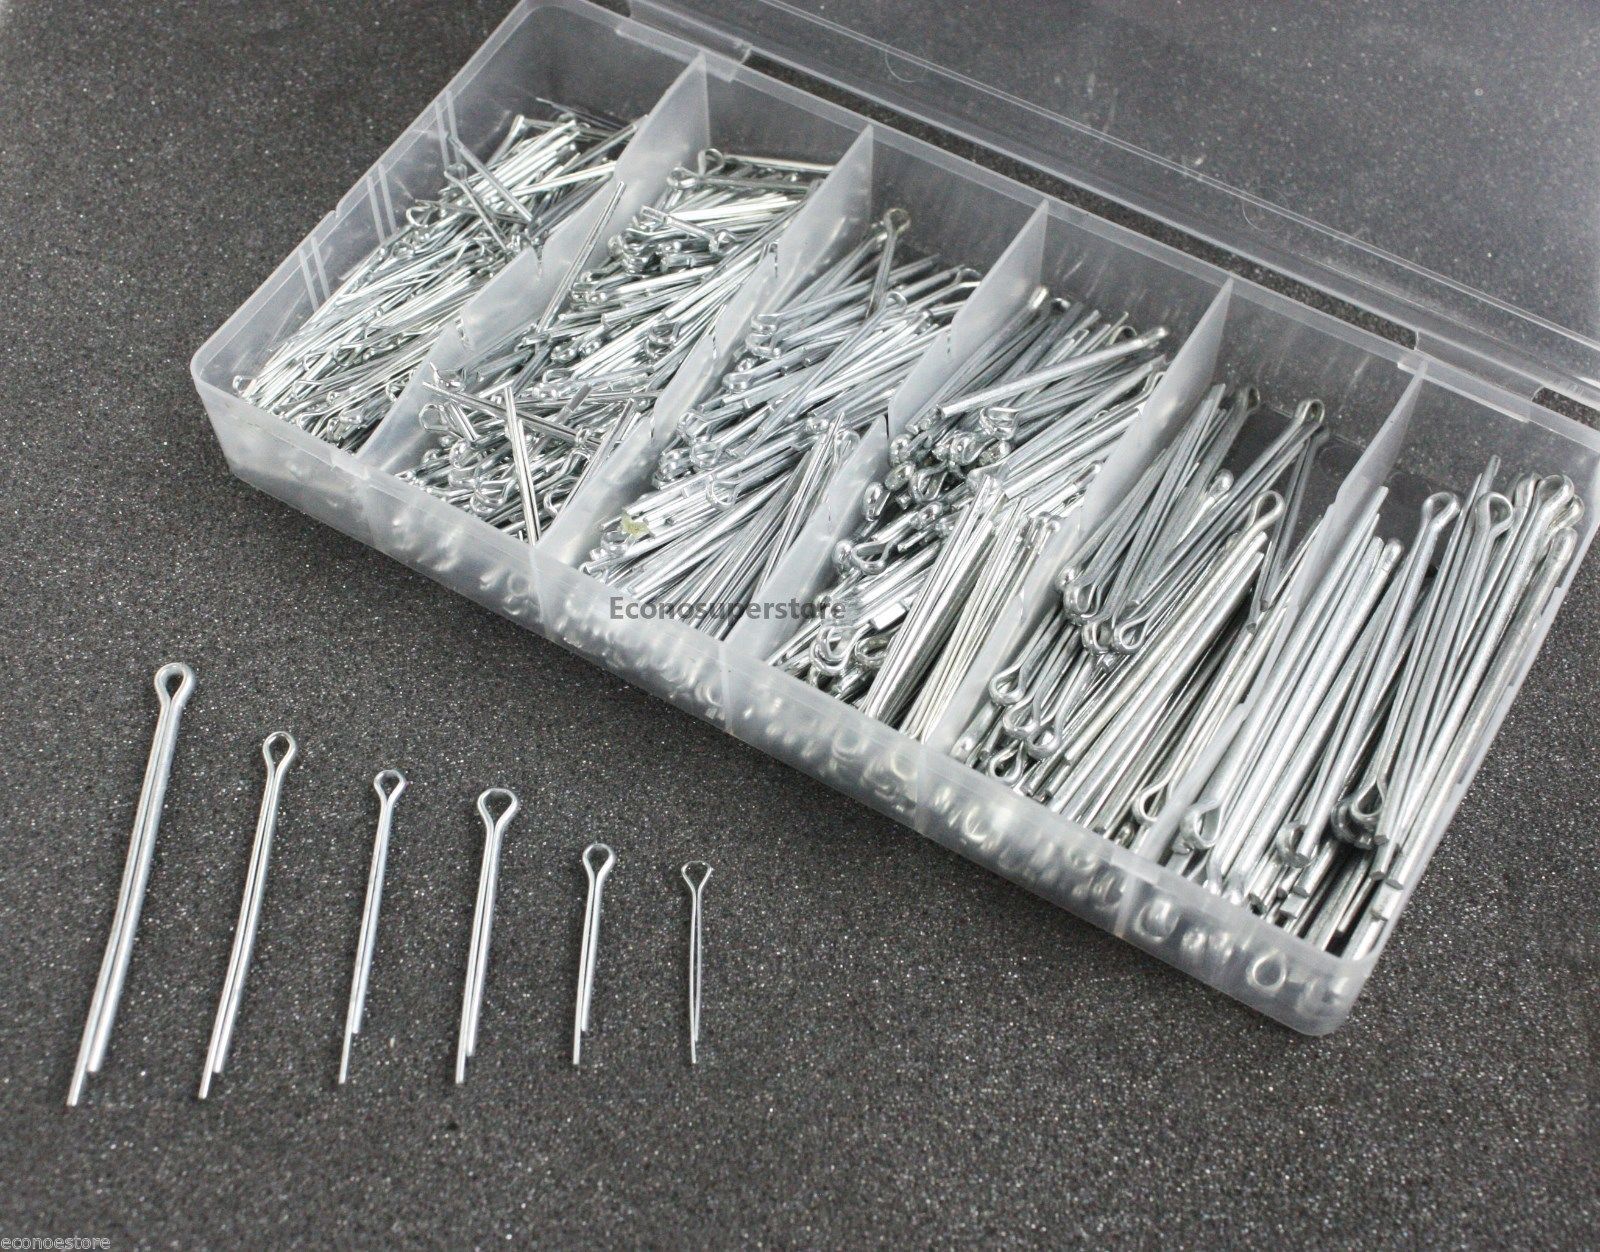 555pc Cotter Pin Clip Key Fitting Assortment Tool Kit Set Case Container Box New Econosuperstore 